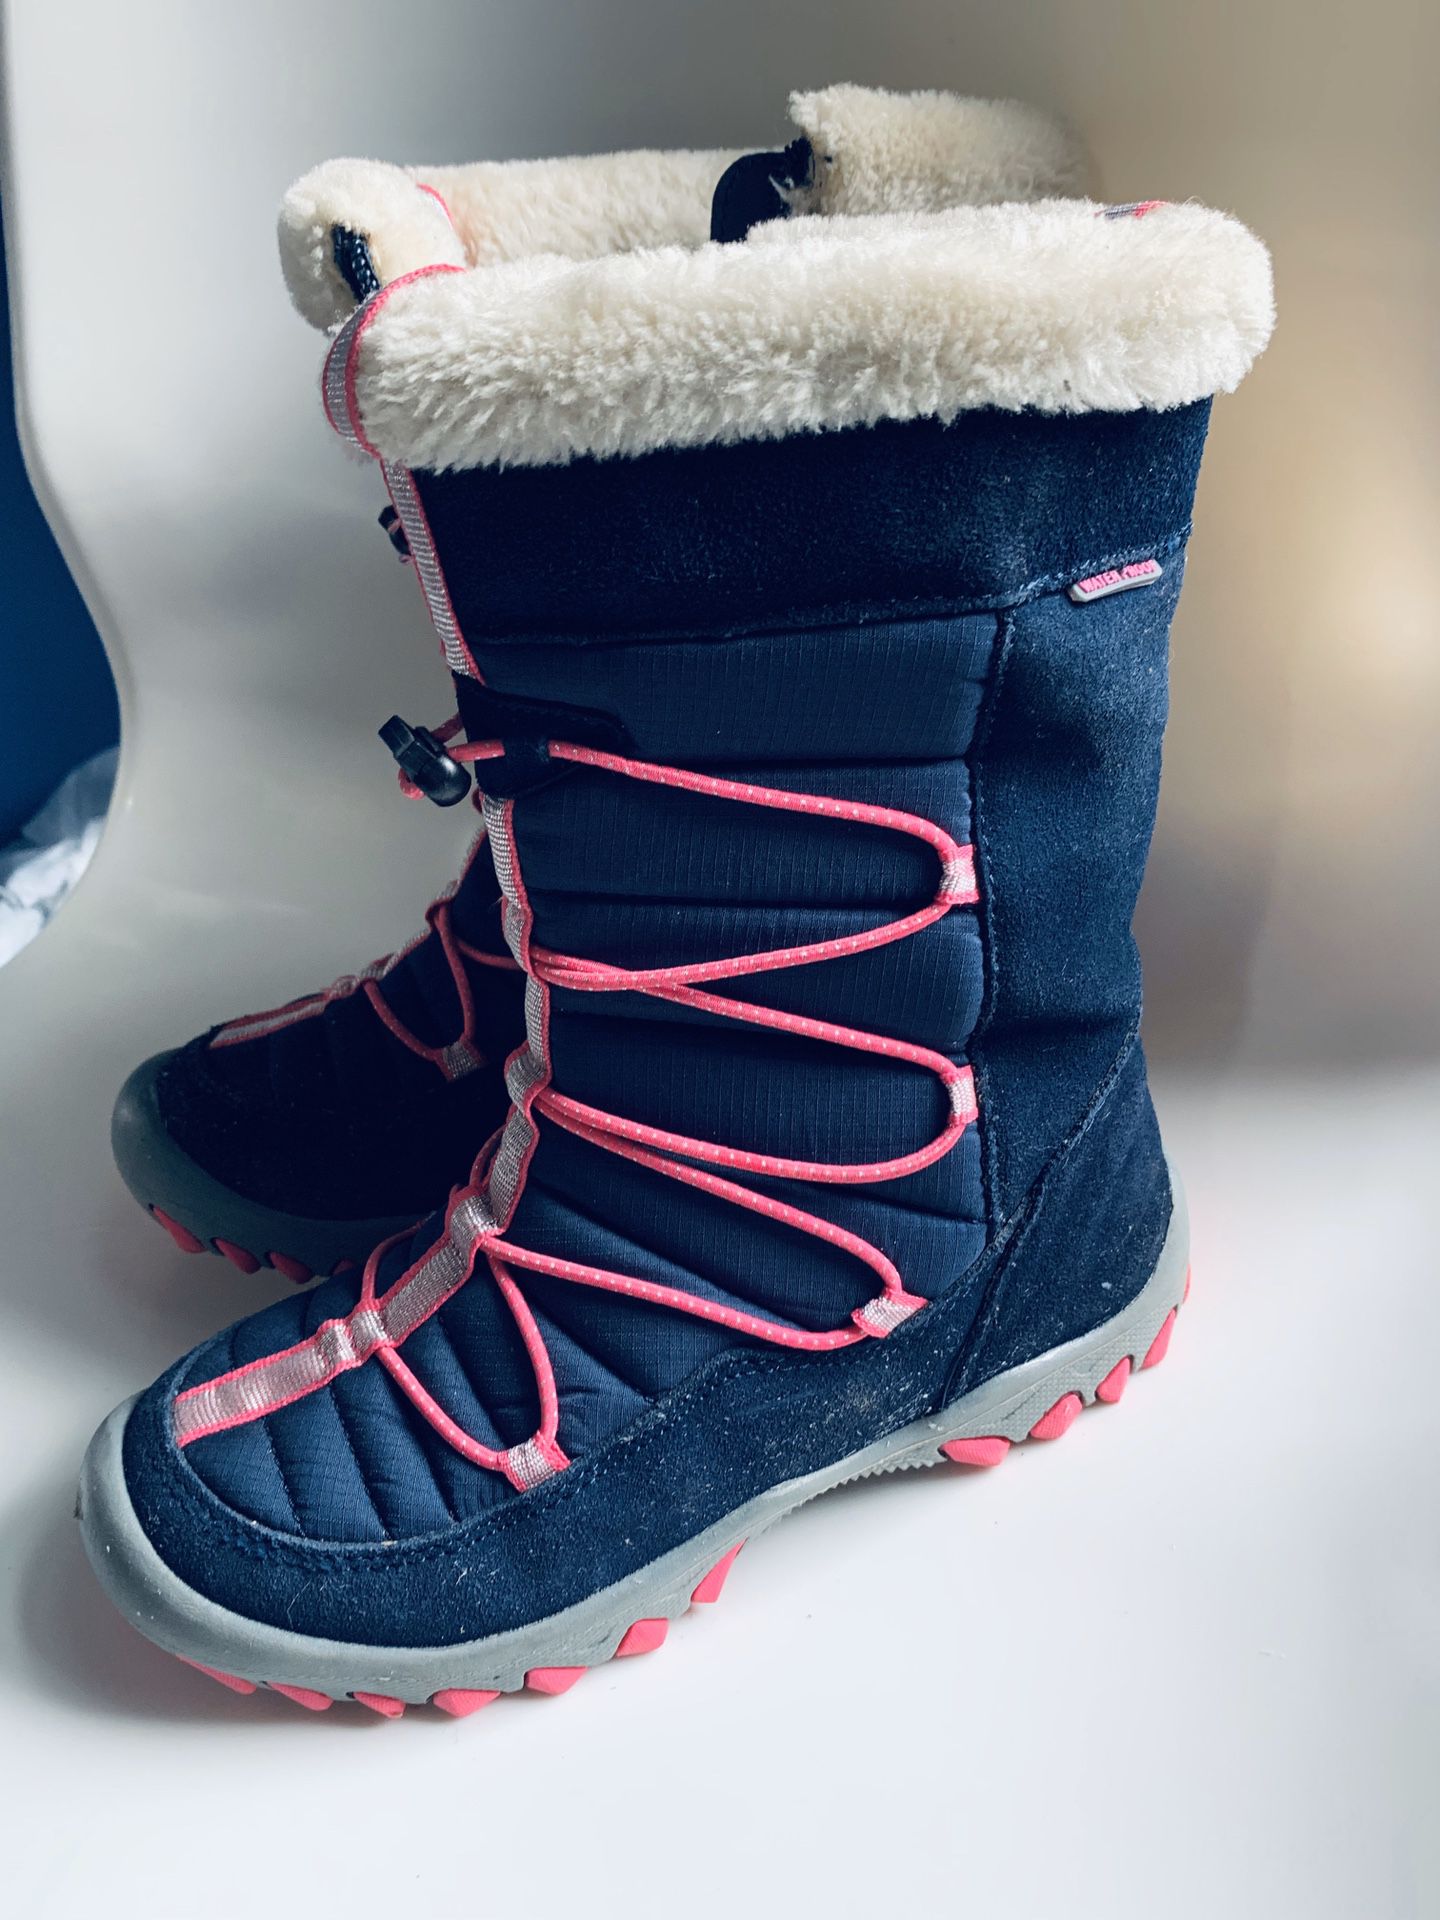 Girls Snow boots size 3